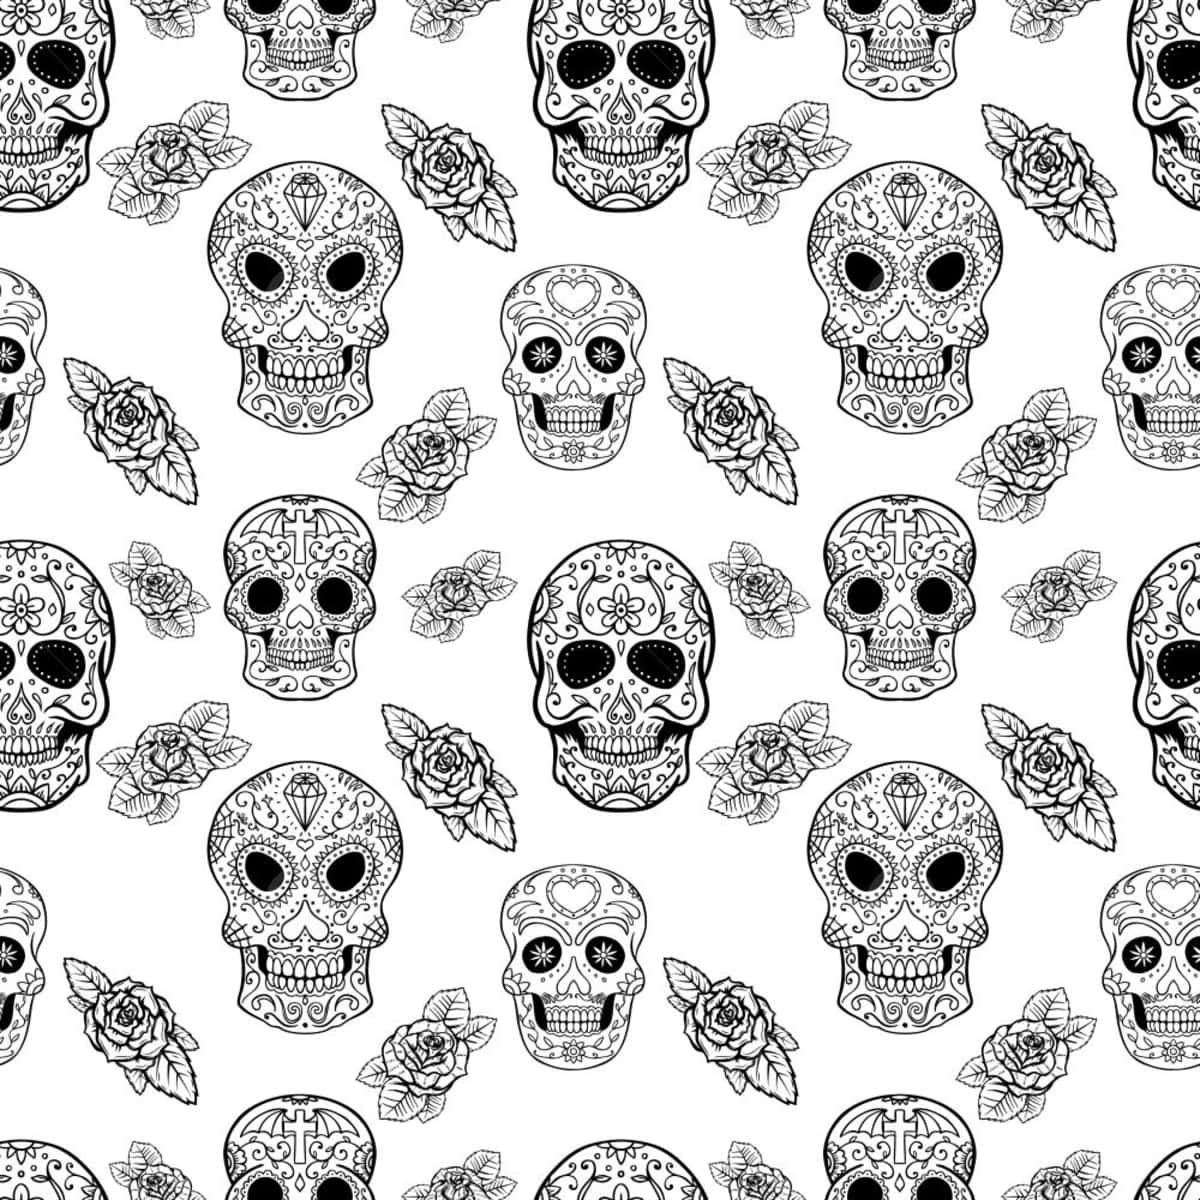 Get creative with this colorful sugar skull background